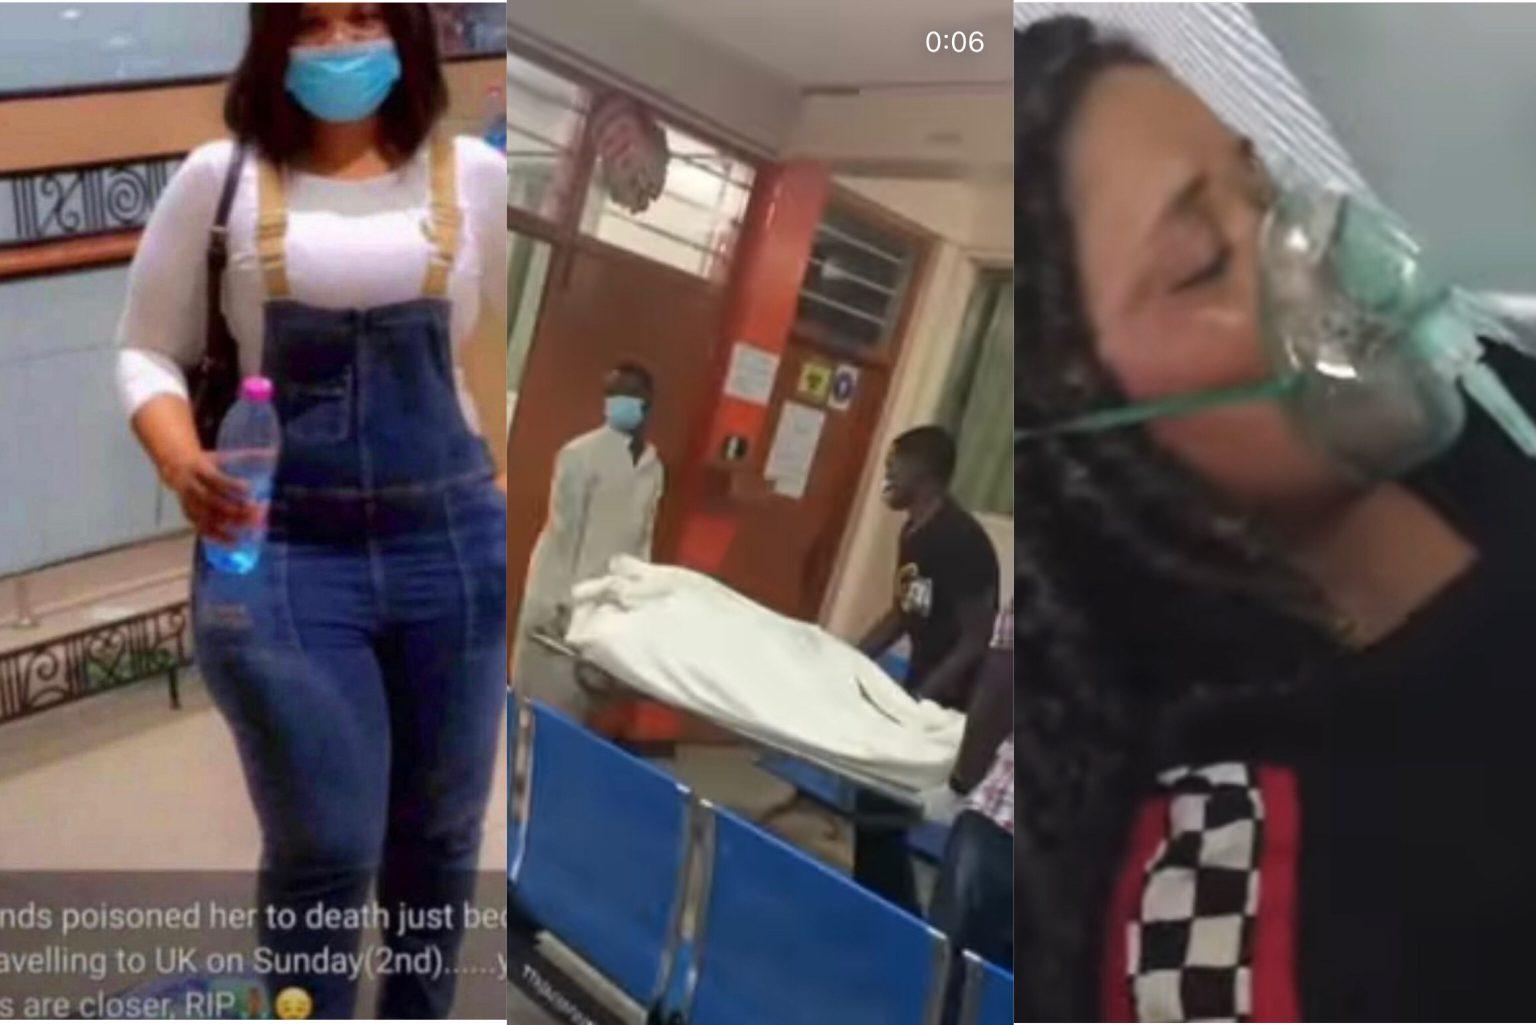 Nana Adwoa: Ghanaian Lady Who Was To Travel To UK Poisoned By Friends (Video)